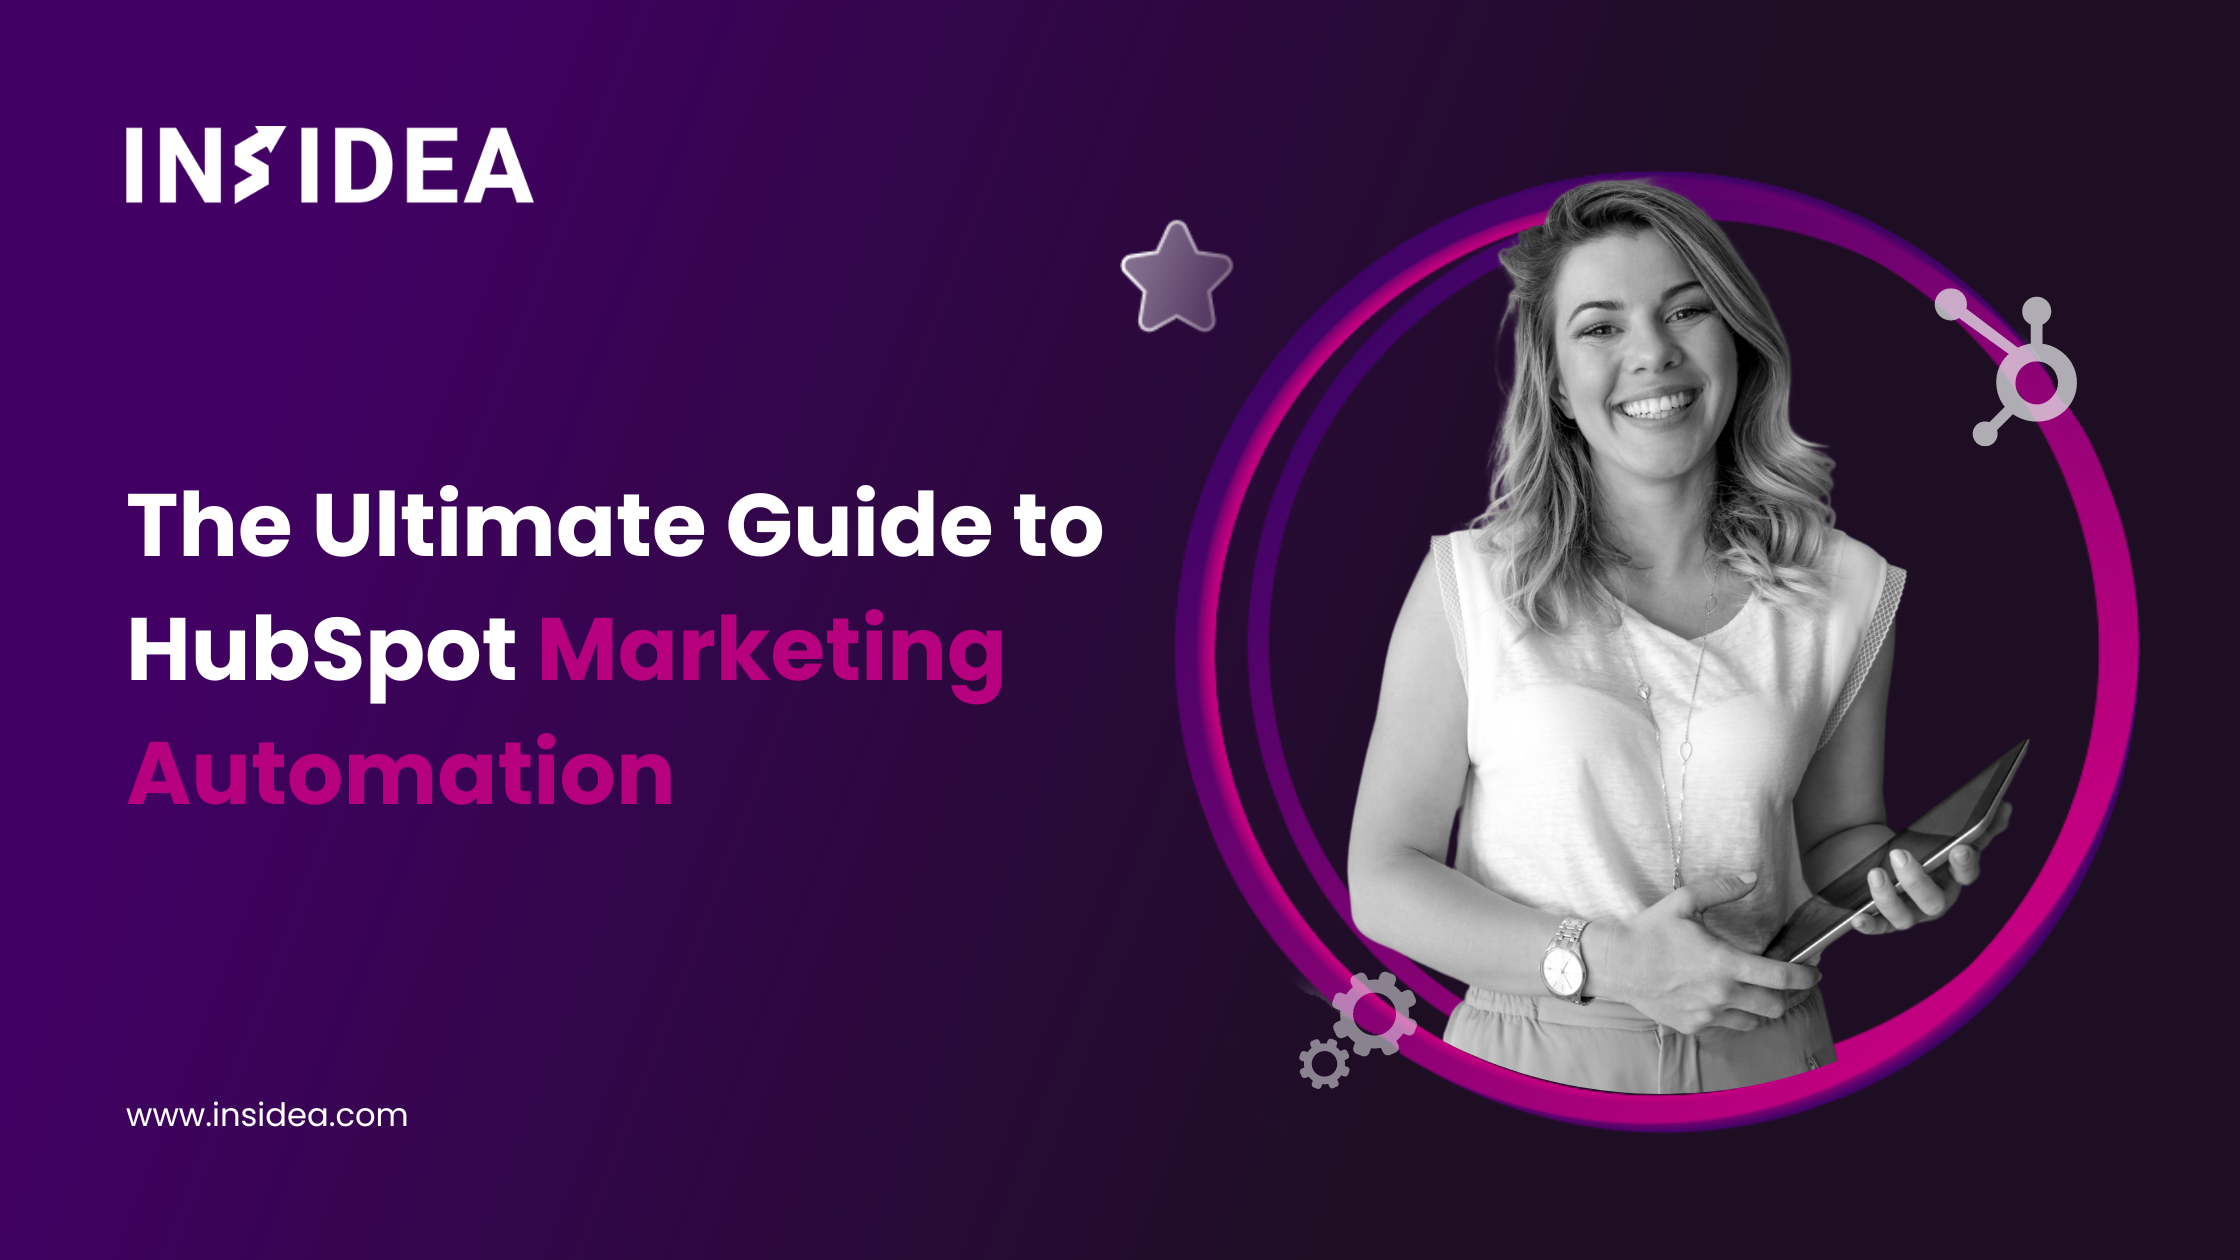 The Ultimate Guide to HubSpot Marketing Automation